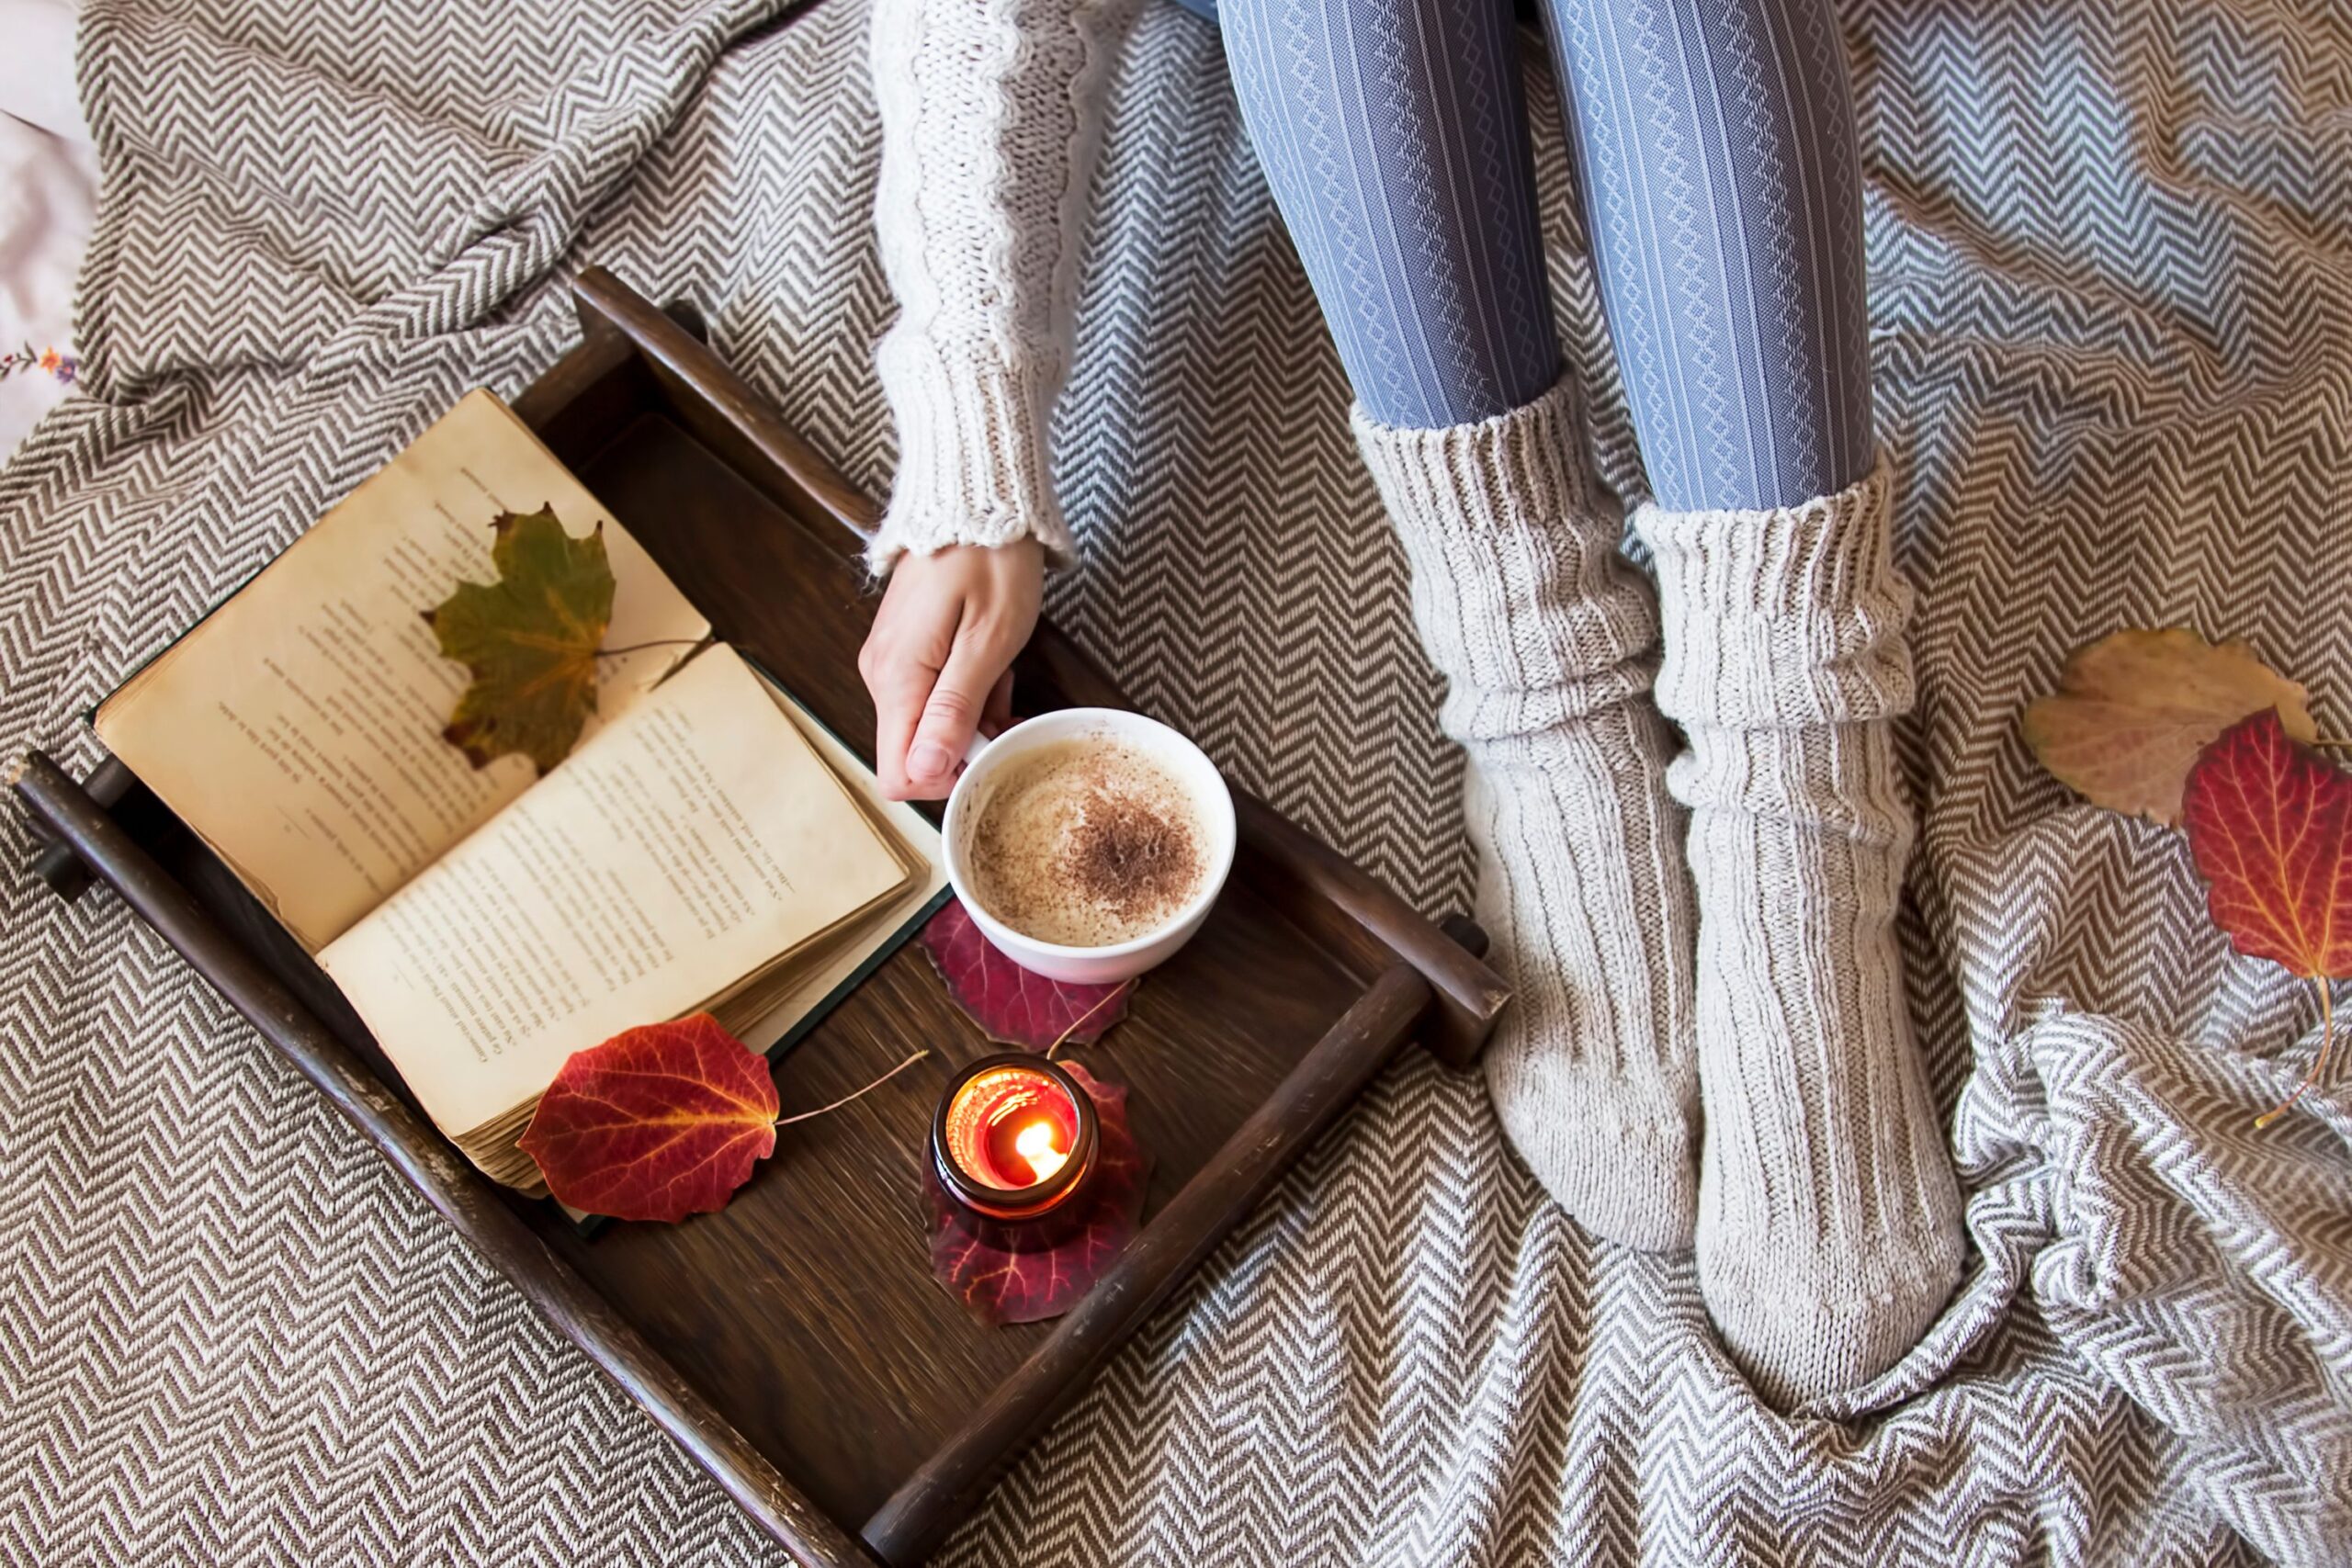 Image of someone with plush warm socks on, reading a book with some cocoa